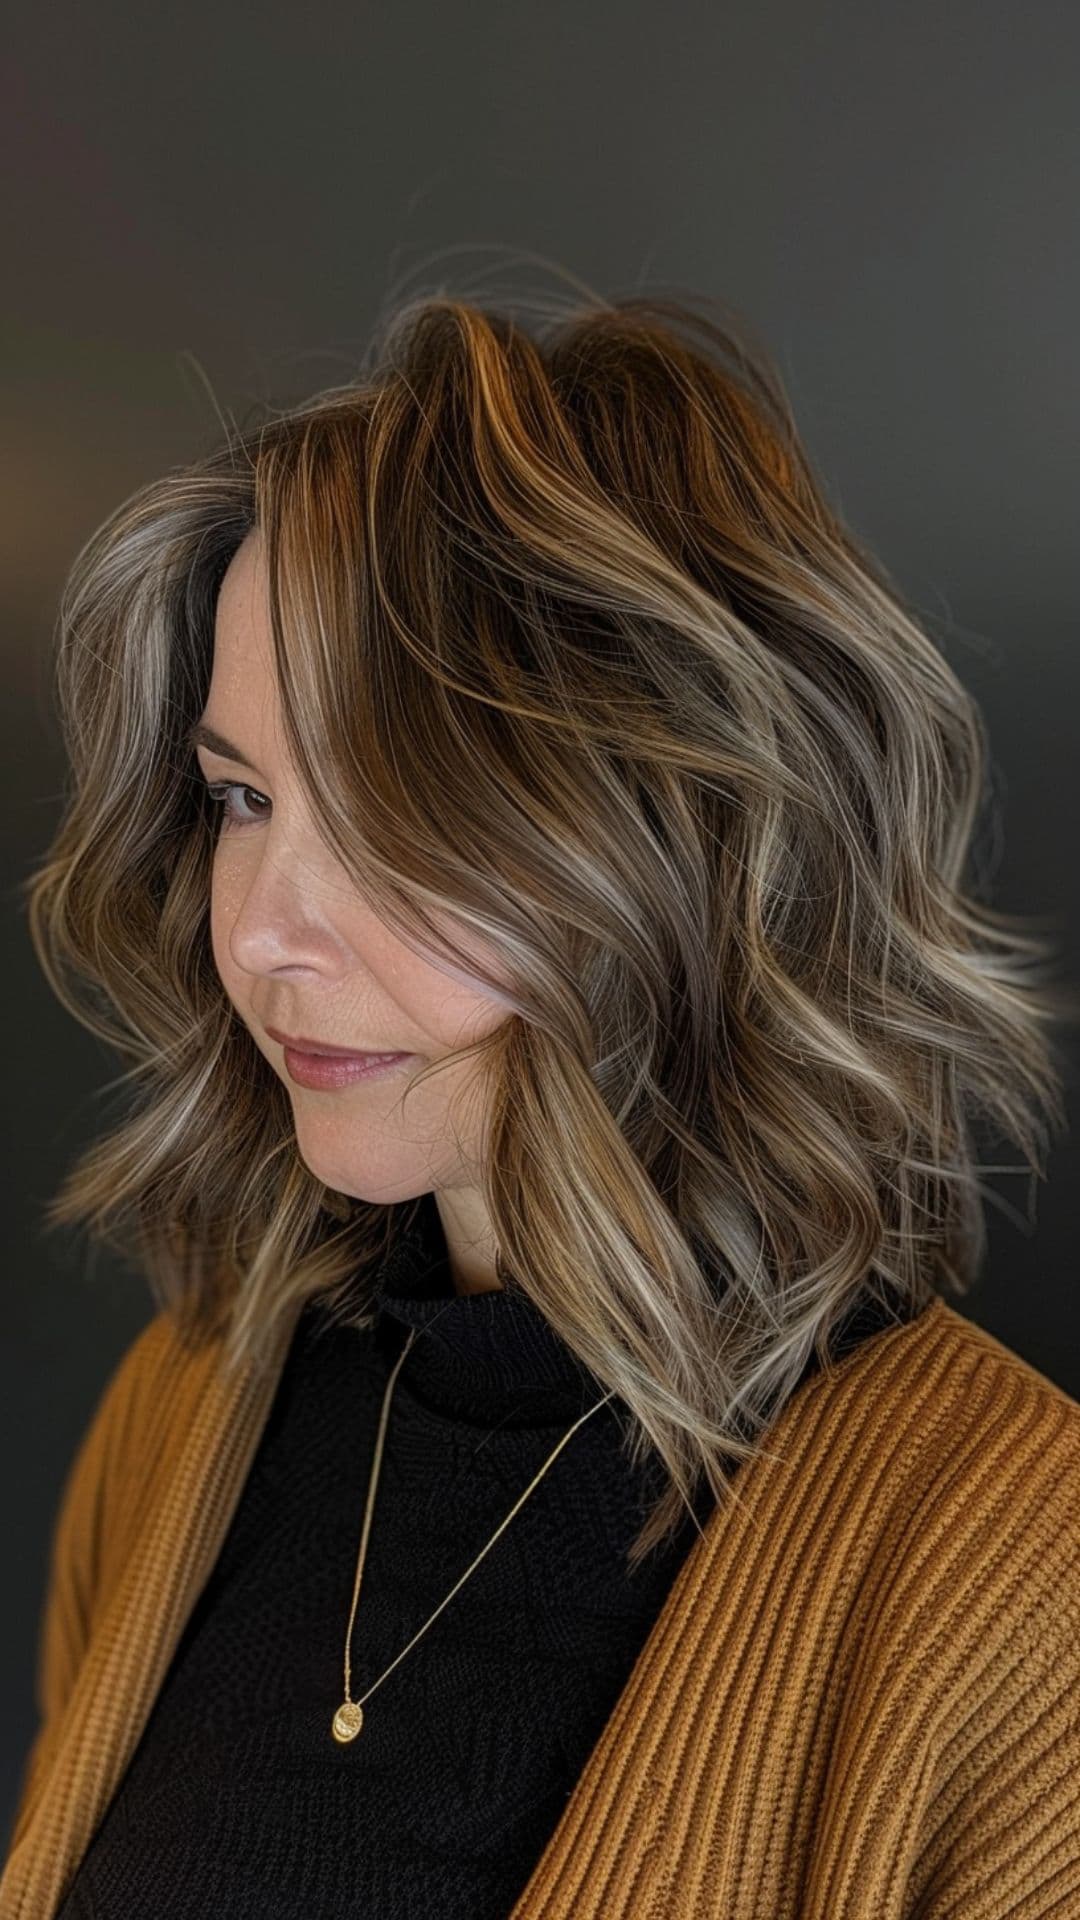 An old woman modelling a layered cut with beachy waves.